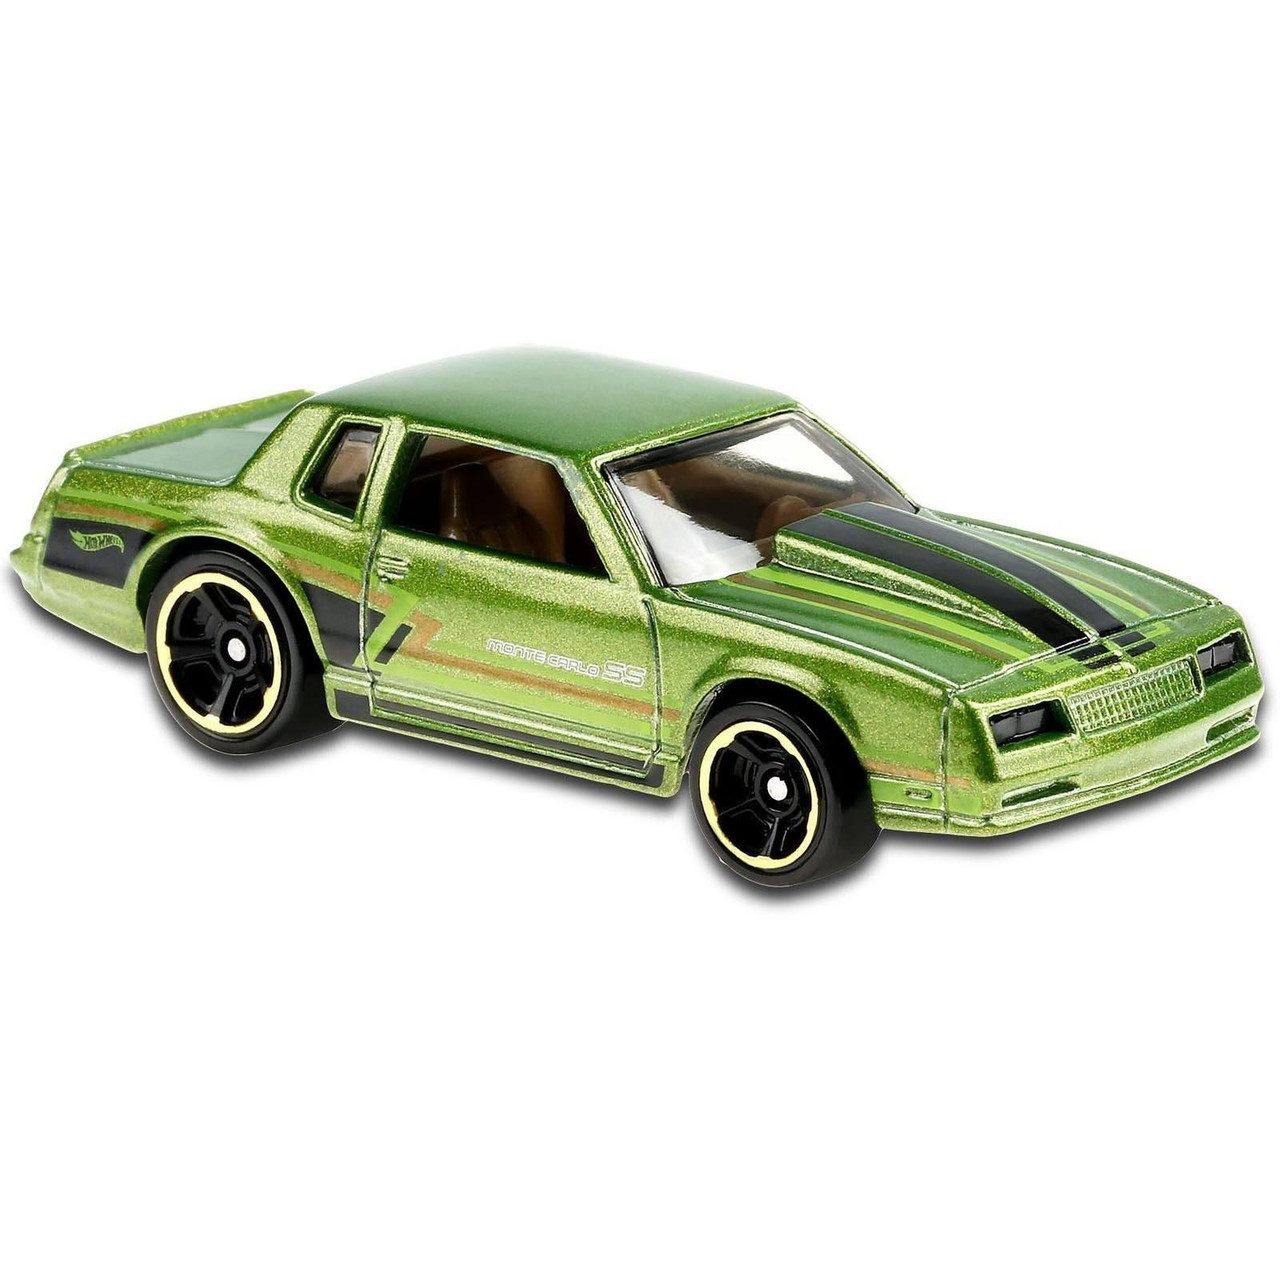 Hot Wheels '86 MONTE CARLO SS 1:64 Scale Diecast Vehicle